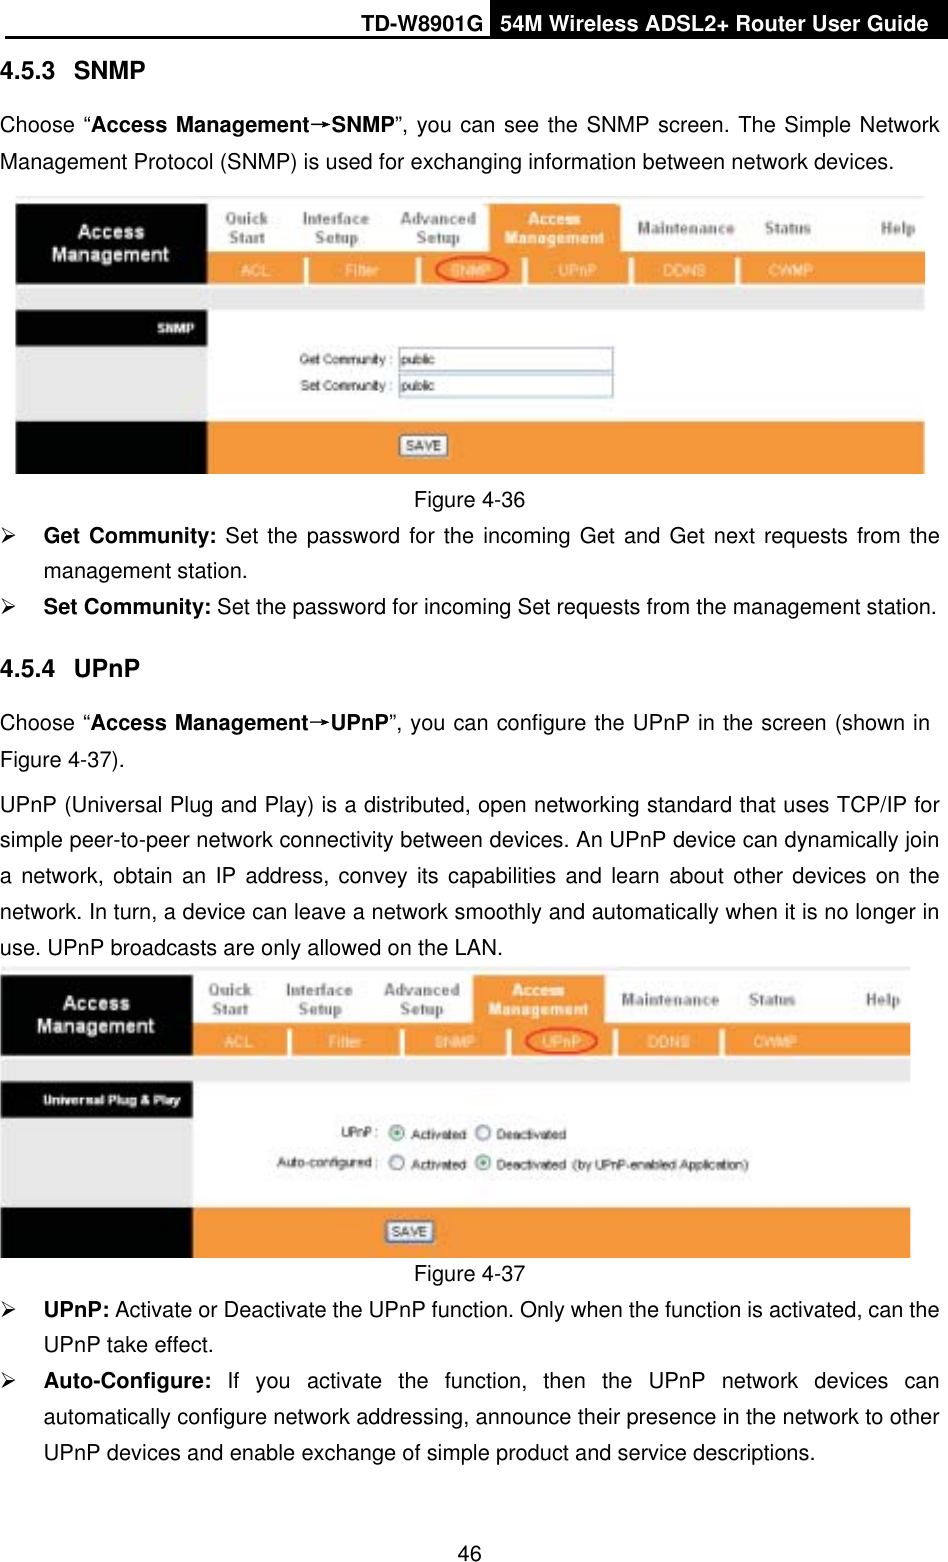 TD-W8901G 54M Wireless ADSL2+ Router User Guide464.5.3 SNMPChoose “Access ManagementėSNMP”, you can see the SNMP screen. The Simple Network Management Protocol (SNMP) is used for exchanging information between network devices. Figure 4-36 ¾Get Community: Set the password for the incoming Get and Get next requests from the management station. ¾Set Community: Set the password for incoming Set requests from the management station. 4.5.4 UPnPChoose “Access ManagementėUPnP”, you can configure the UPnP in the screen (shown in Figure 4-37).UPnP (Universal Plug and Play) is a distributed, open networking standard that uses TCP/IP for simple peer-to-peer network connectivity between devices. An UPnP device can dynamically join a network, obtain an IP address, convey its capabilities and learn about other devices on the network. In turn, a device can leave a network smoothly and automatically when it is no longer in use. UPnP broadcasts are only allowed on the LAN. Figure 4-37 ¾UPnP: Activate or Deactivate the UPnP function. Only when the function is activated, can the UPnP take effect. ¾Auto-Configure: If you activate the function, then the UPnP network devices can automatically configure network addressing, announce their presence in the network to other UPnP devices and enable exchange of simple product and service descriptions. 